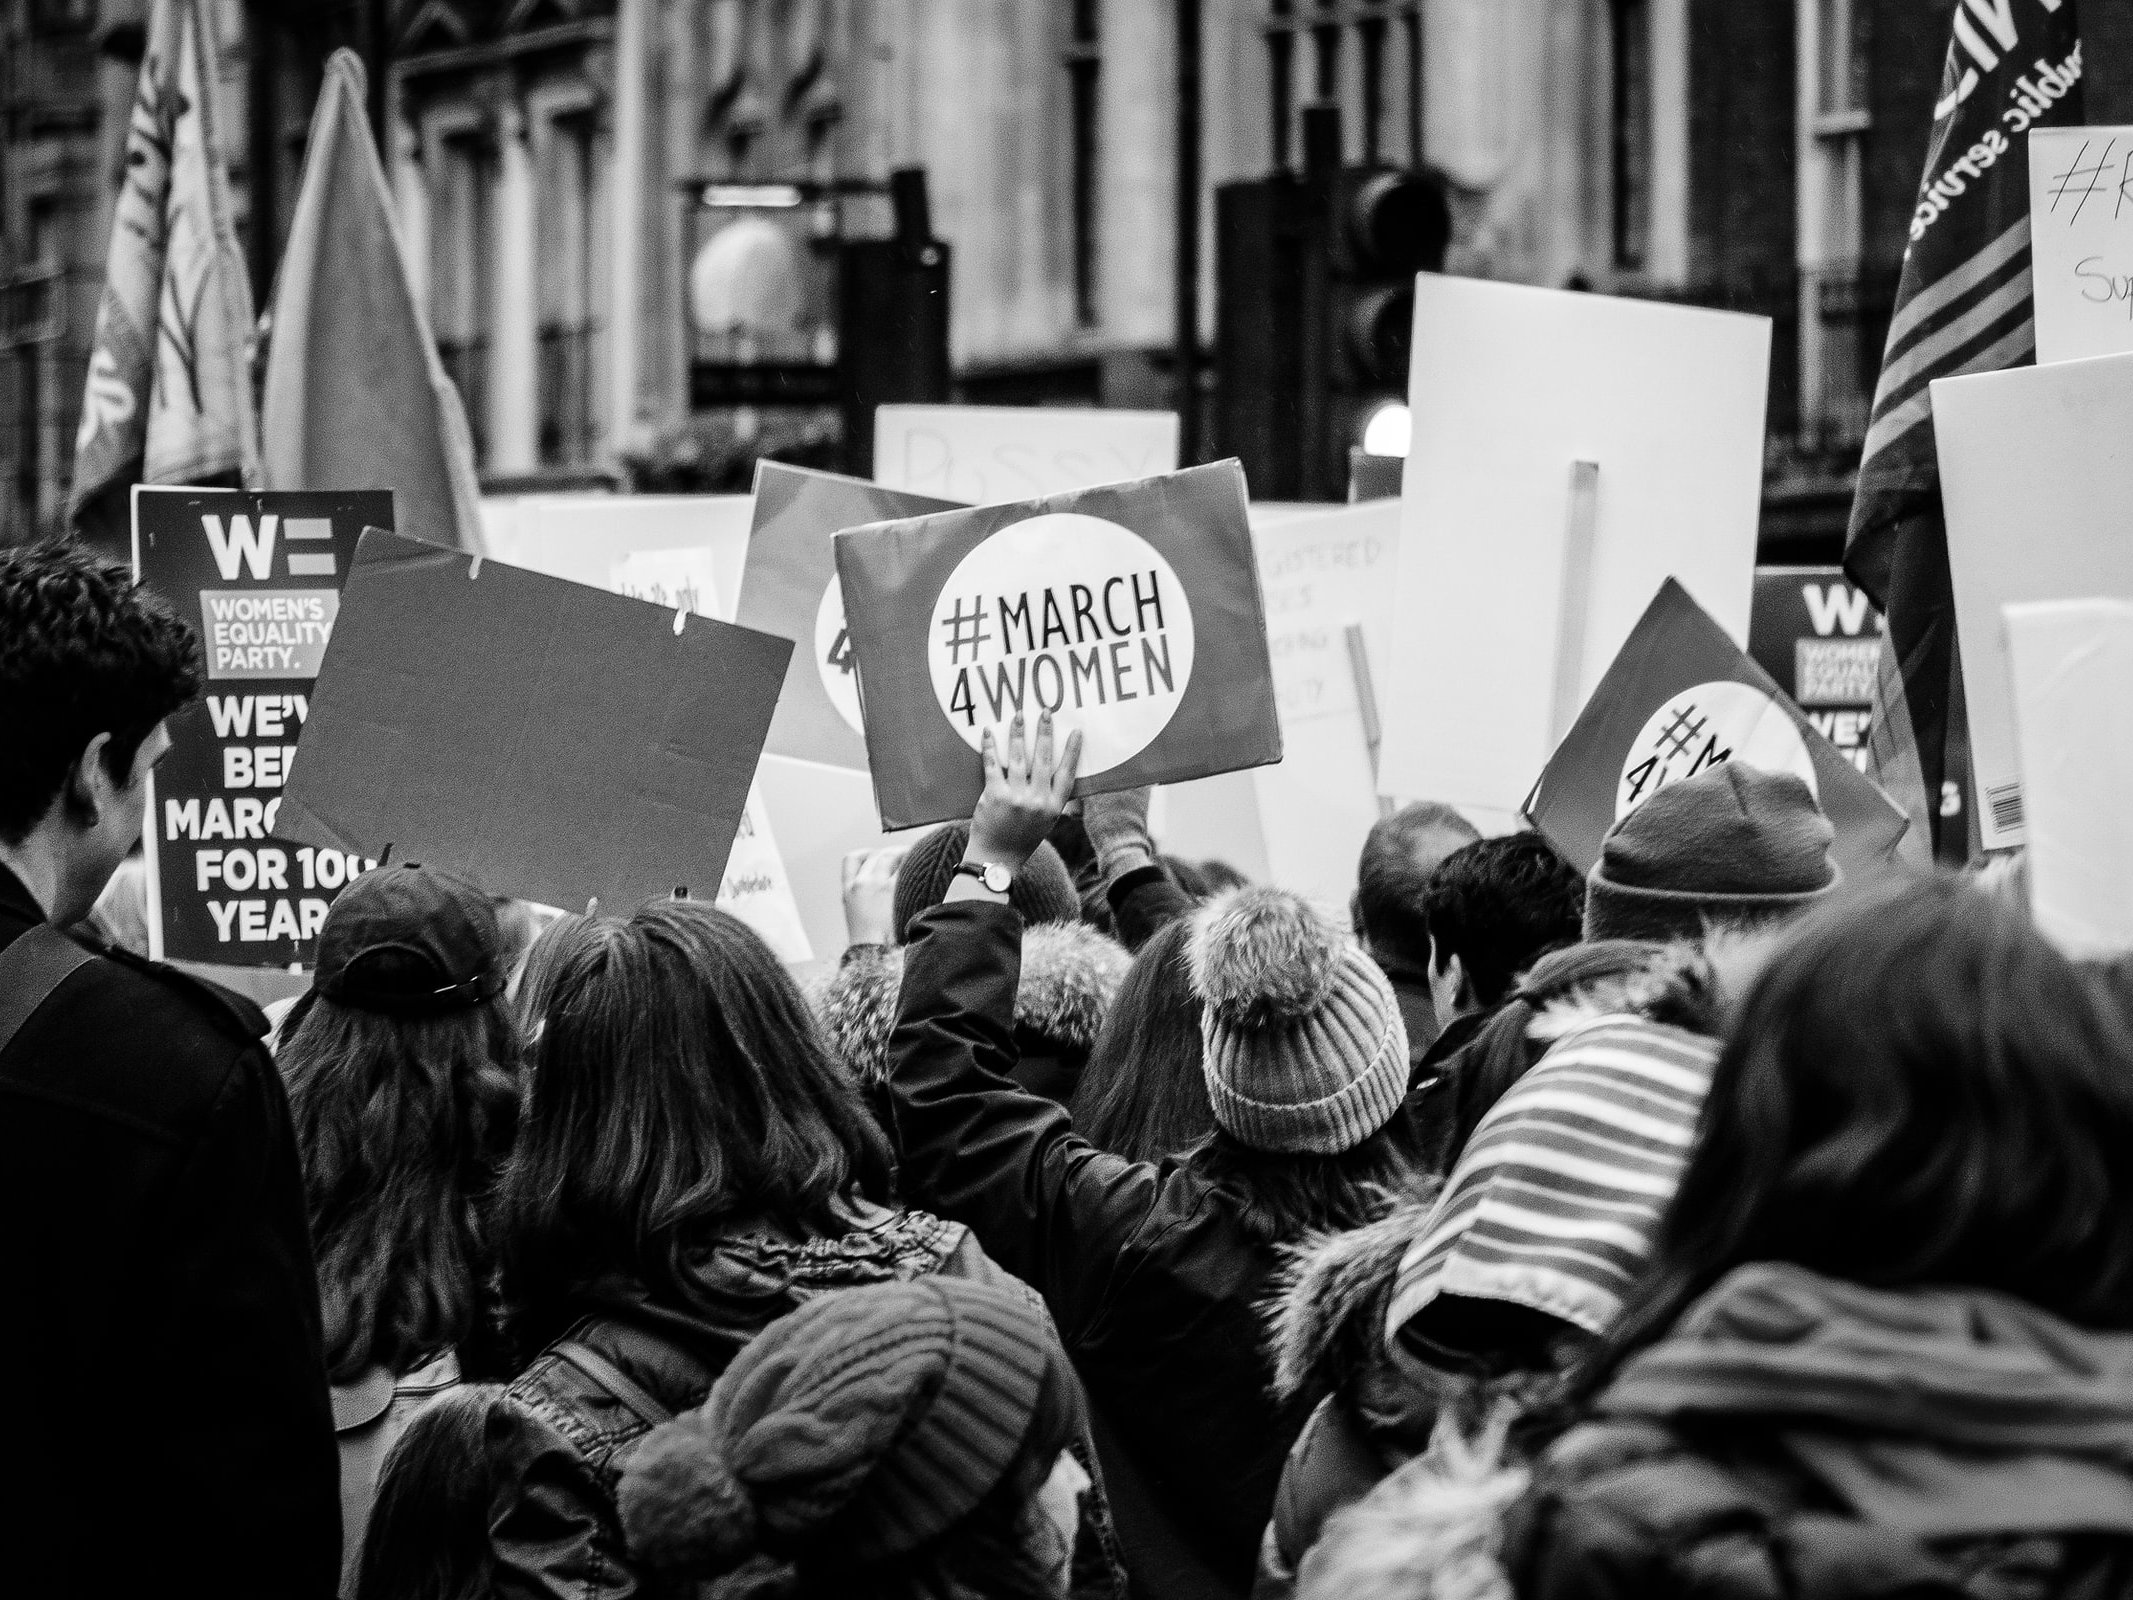 Black and white image of of a group of protesters, seen from behind. All are holding up placards, the most visible one in the cenbtre of the image reads 'March 4 Women'